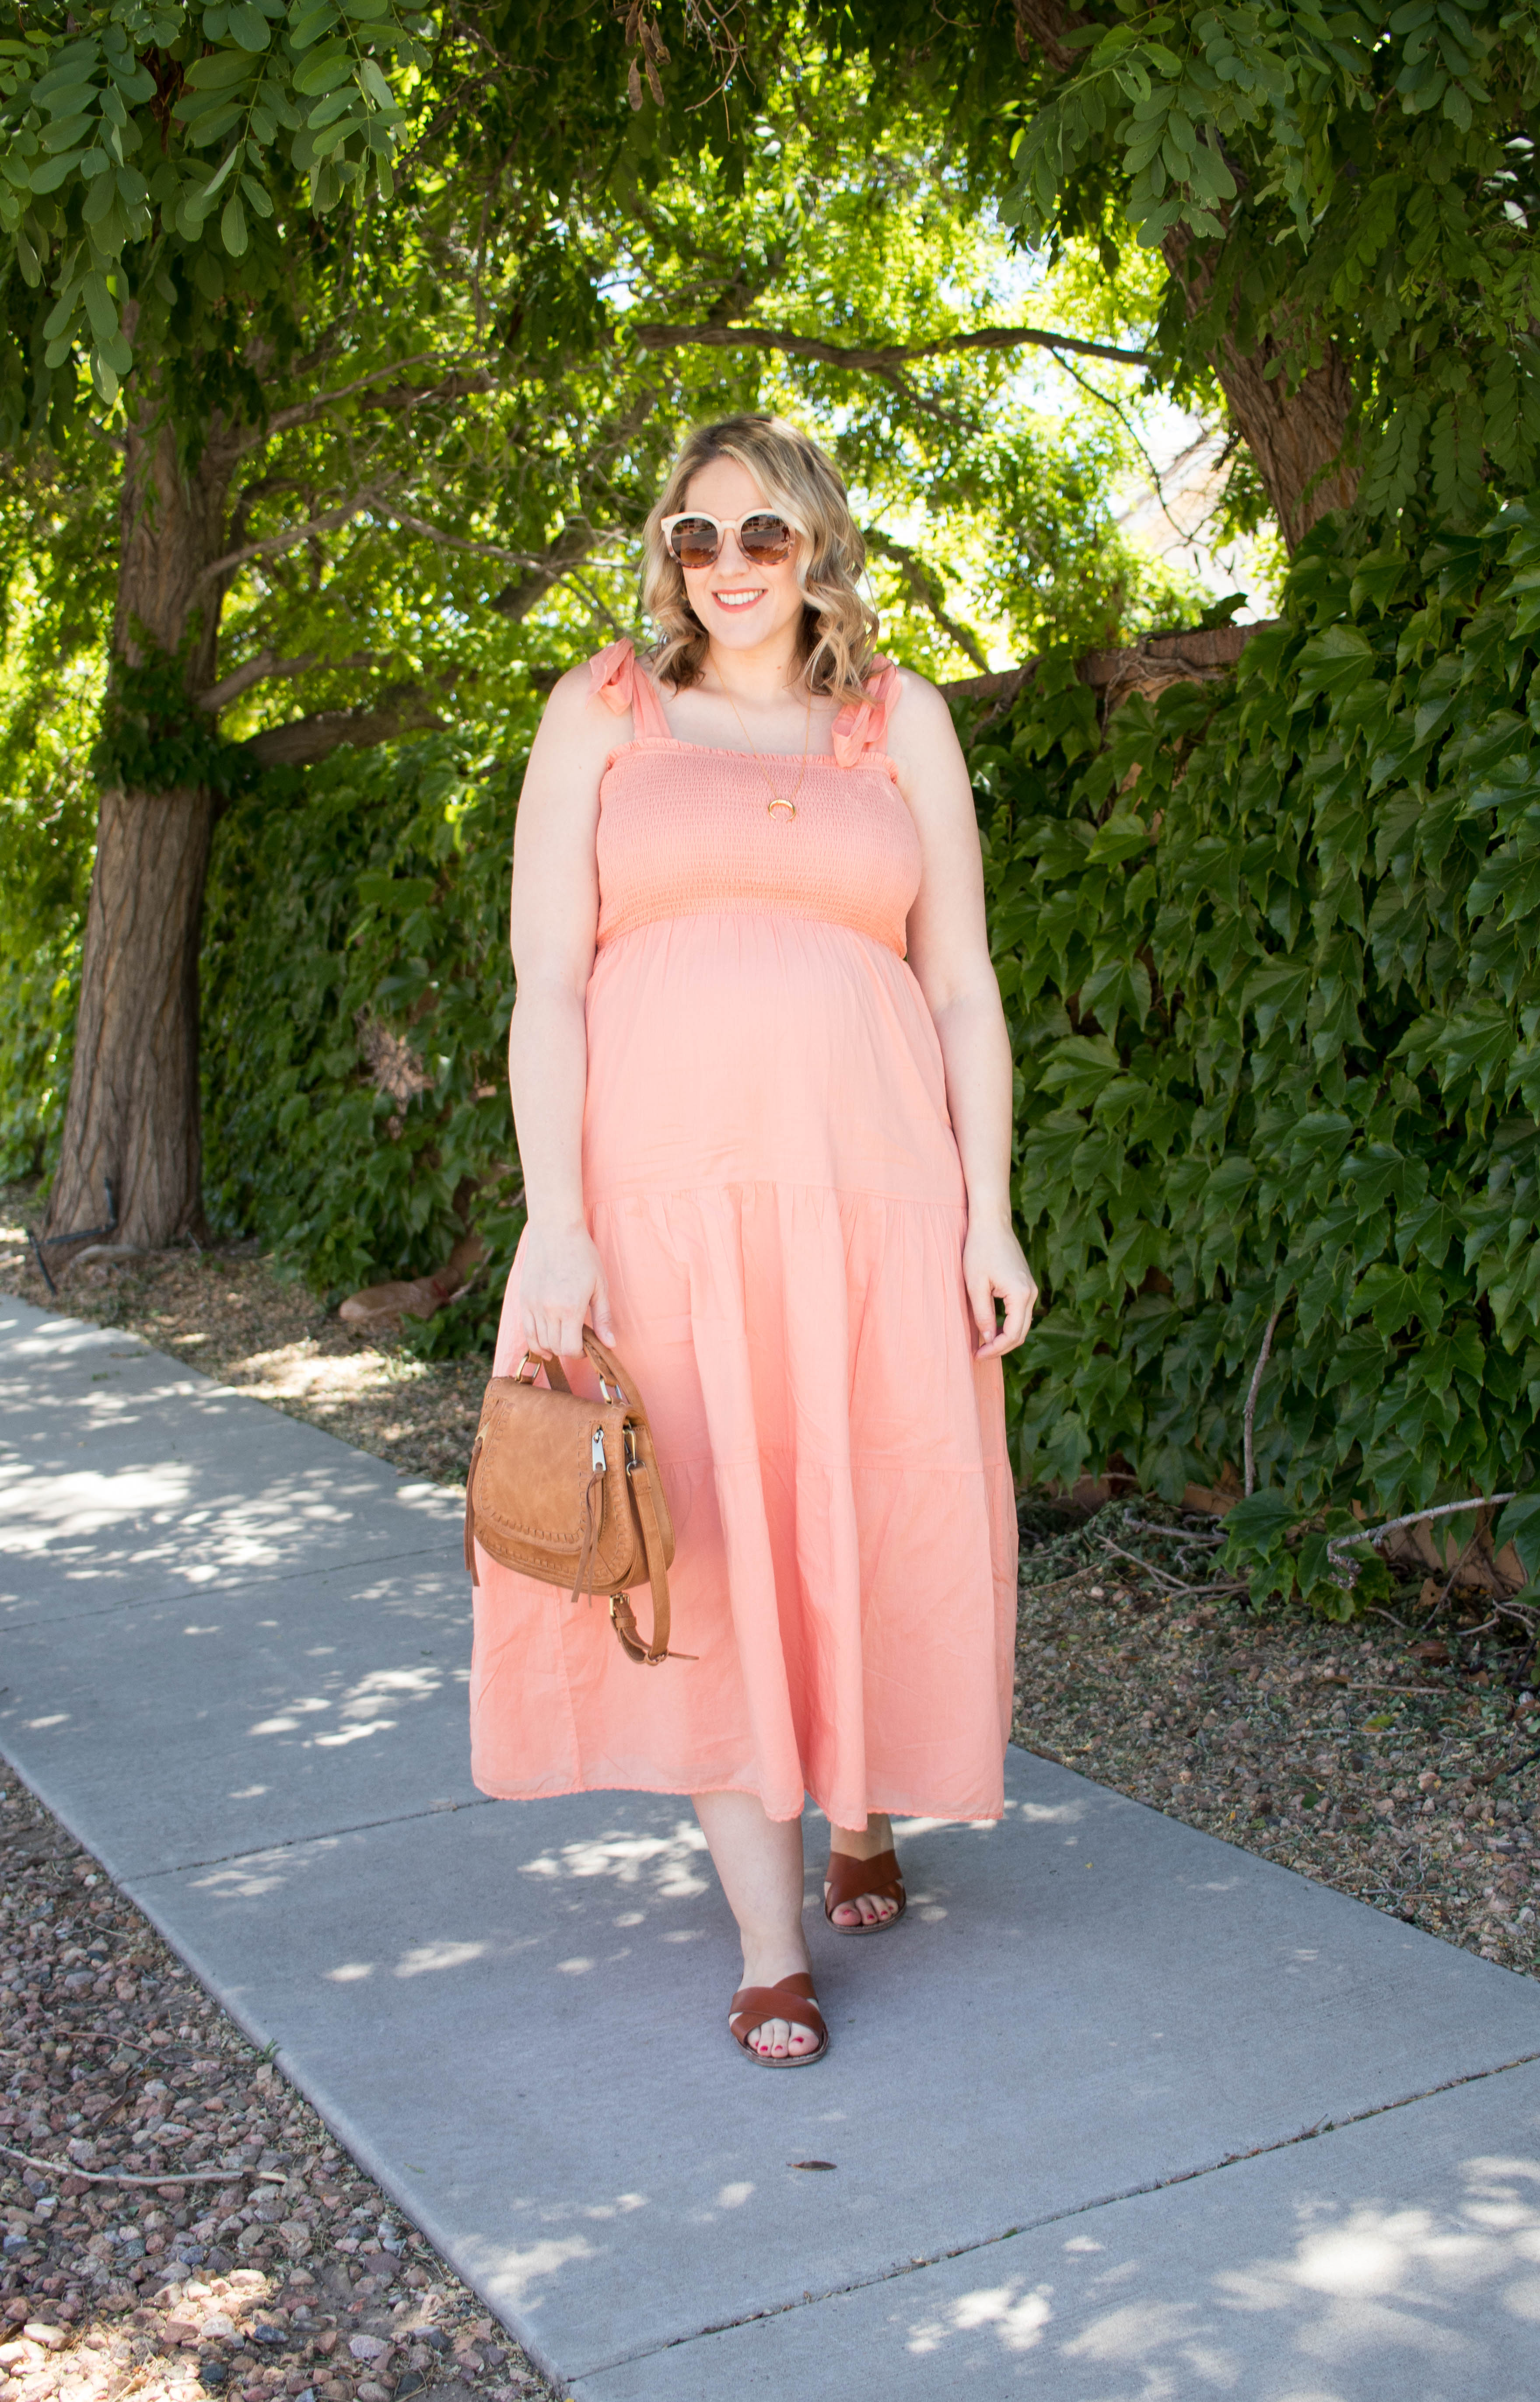 summer maternity outfit ideas #maternityfashion #pregnancy #pregnancystyle